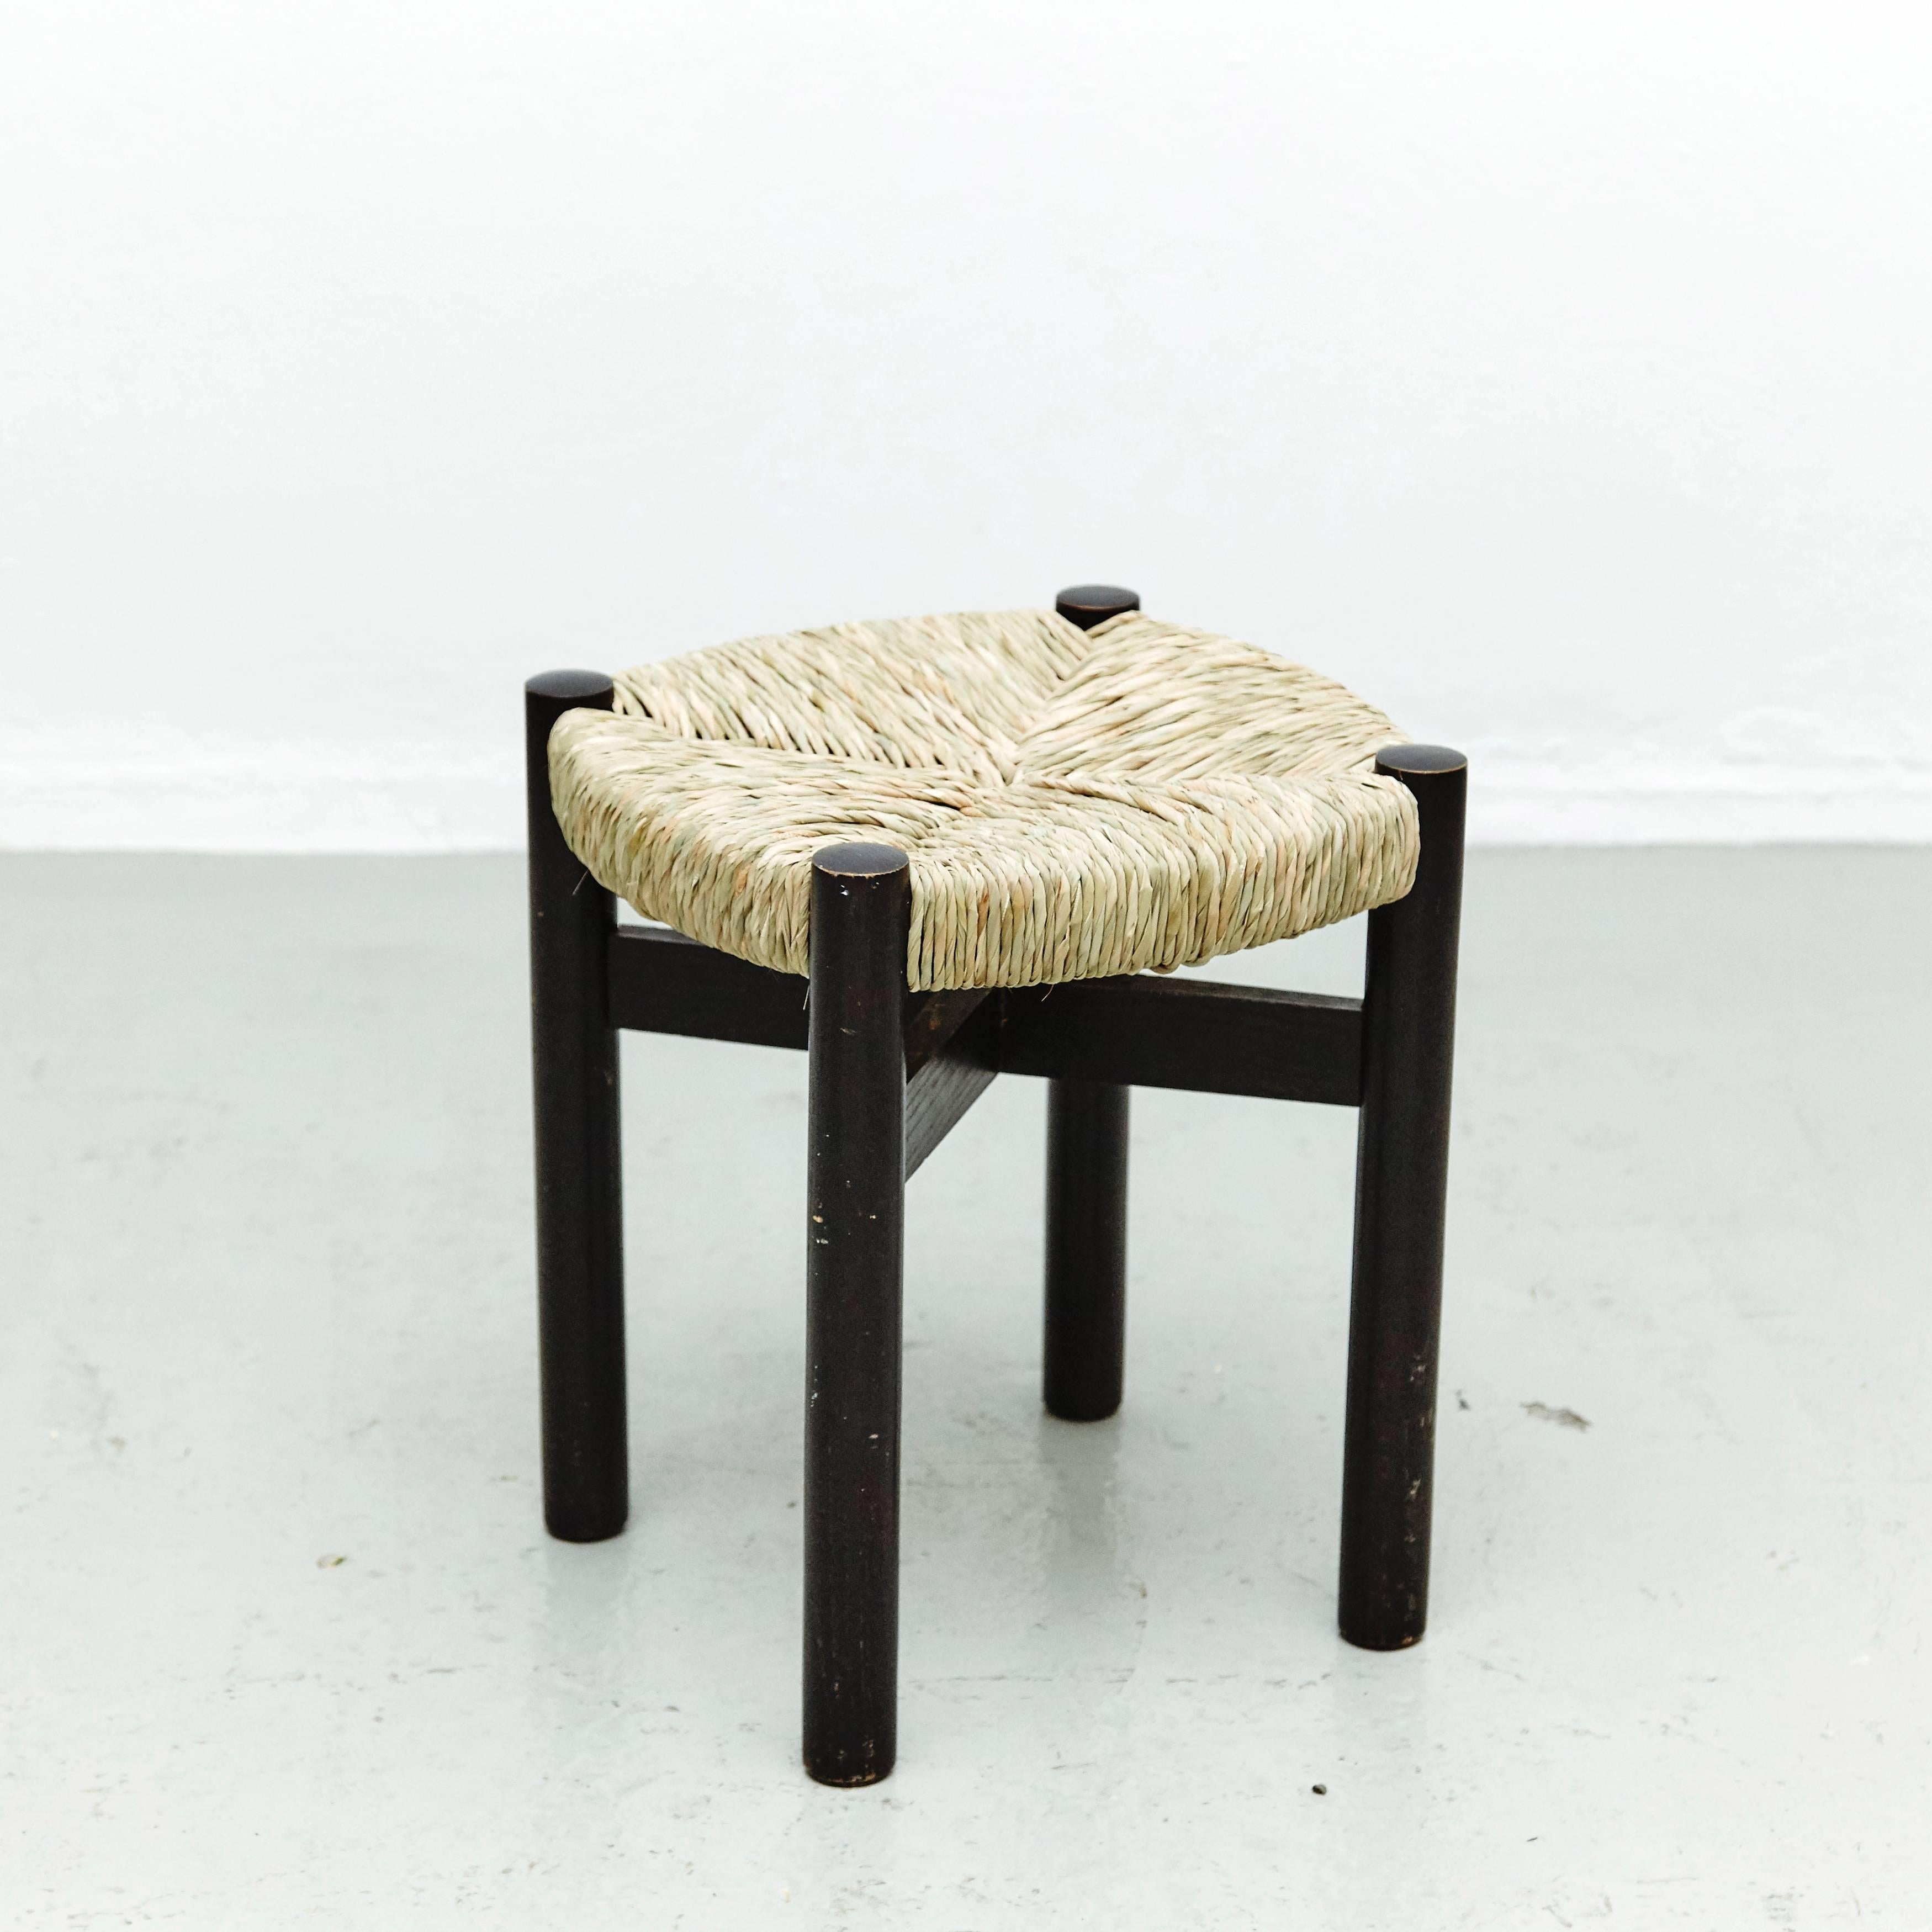 Stool, model meribel, designed by Charlotte Perriand, circa 1950.
Manufactured in France.
Wood and renewed rattan. Black lacquer.

In good condition, with minor wear consistent with age and use, preserving a beautiful patina.

Charlotte